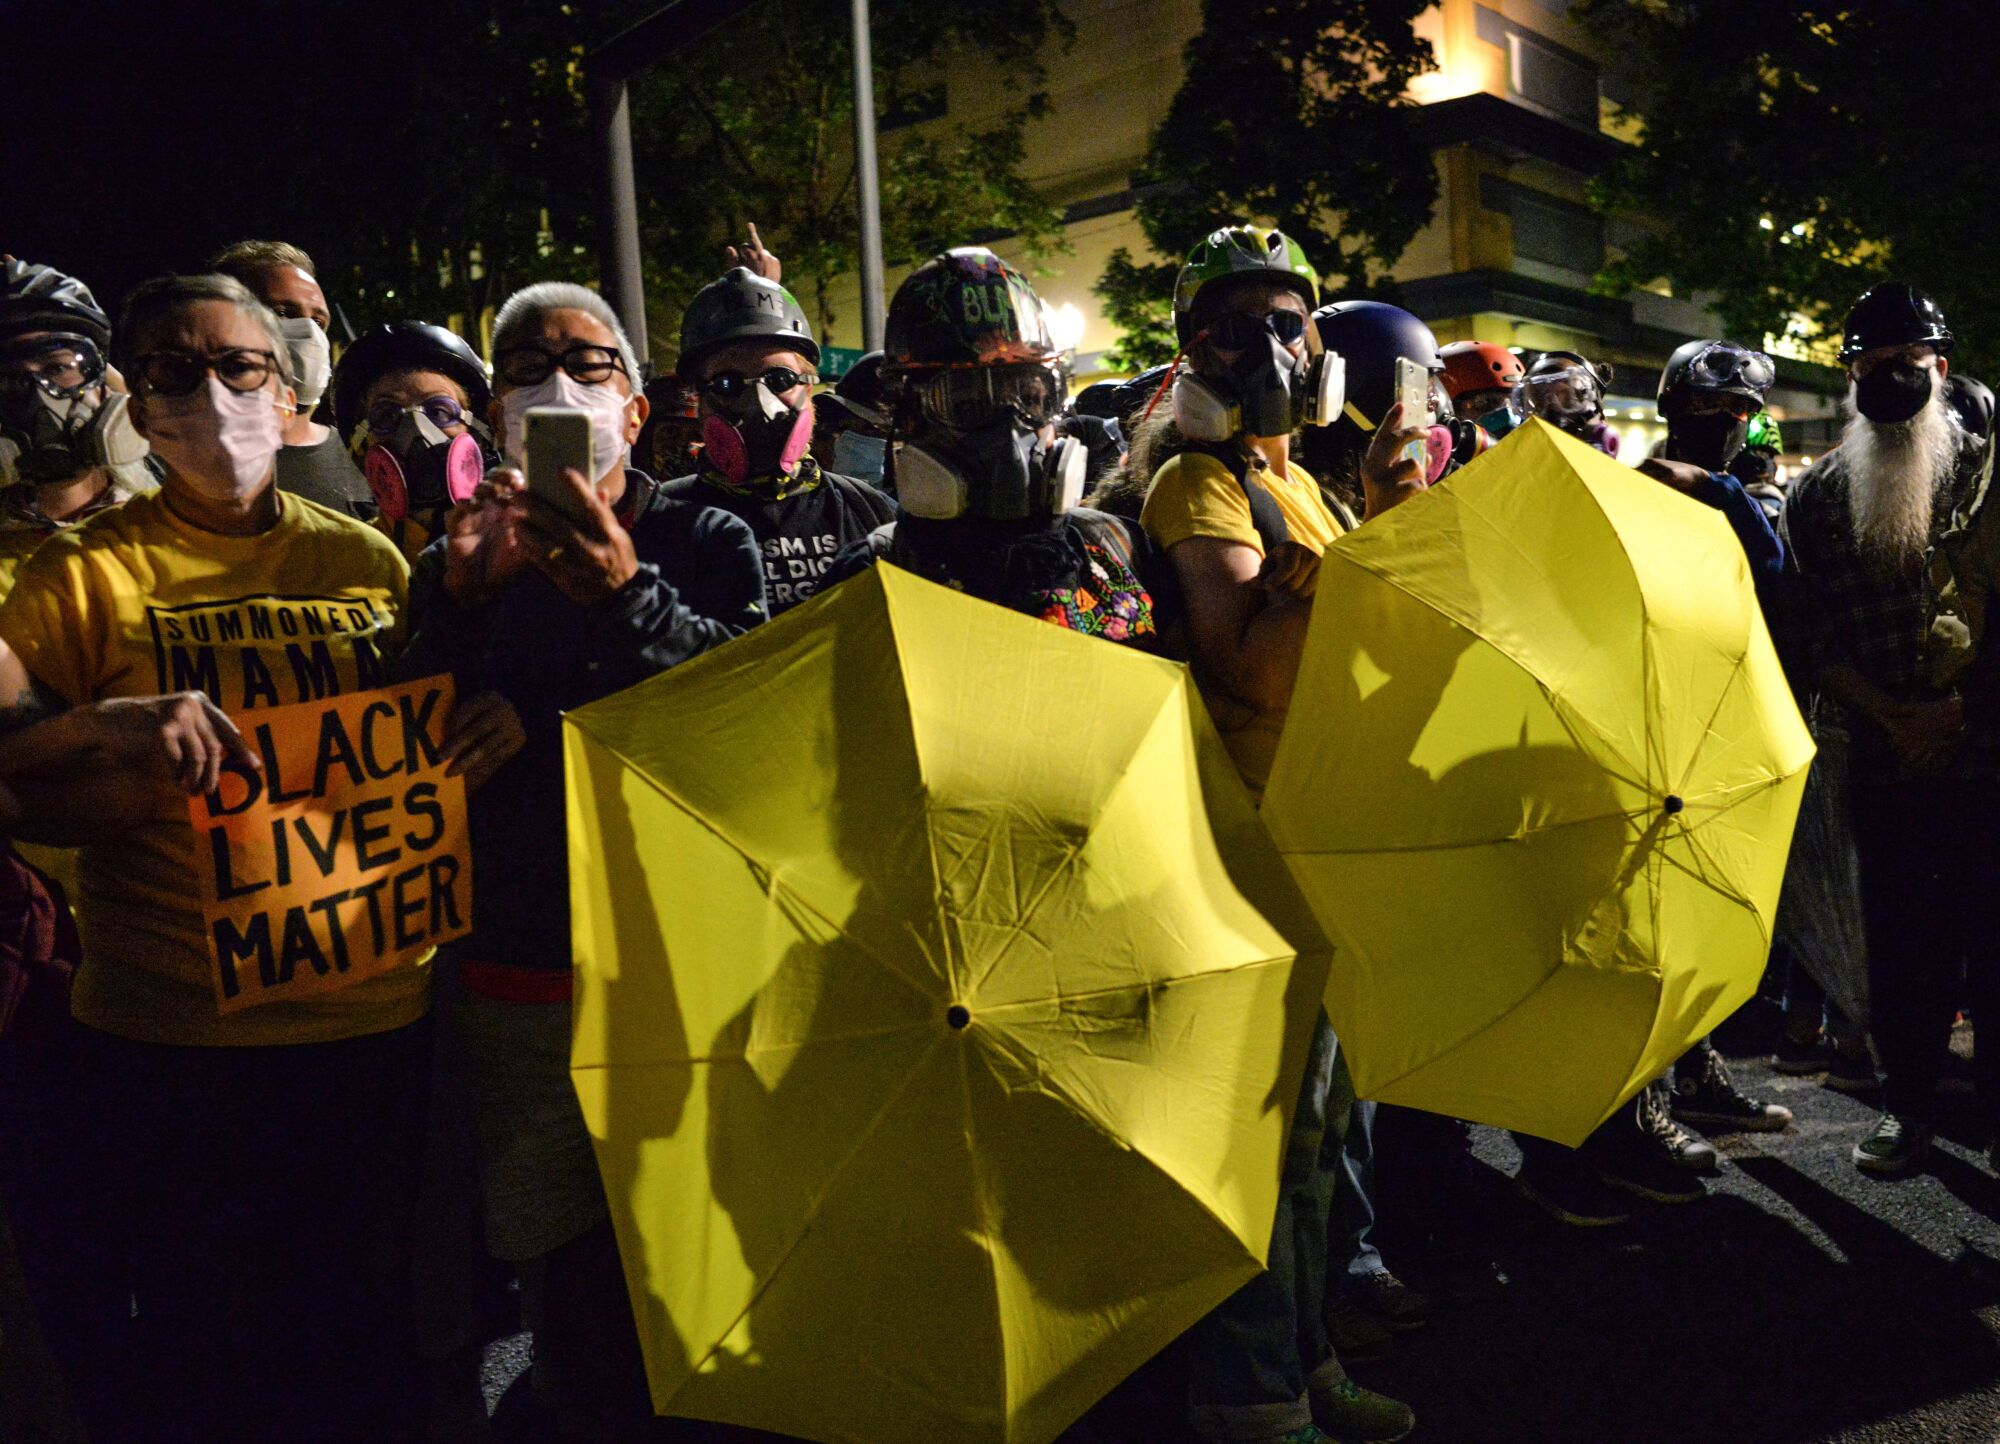 Protesters carry umbrellas as they gather at the Mark O. Hatfield Courthouse in Portland, Ore.